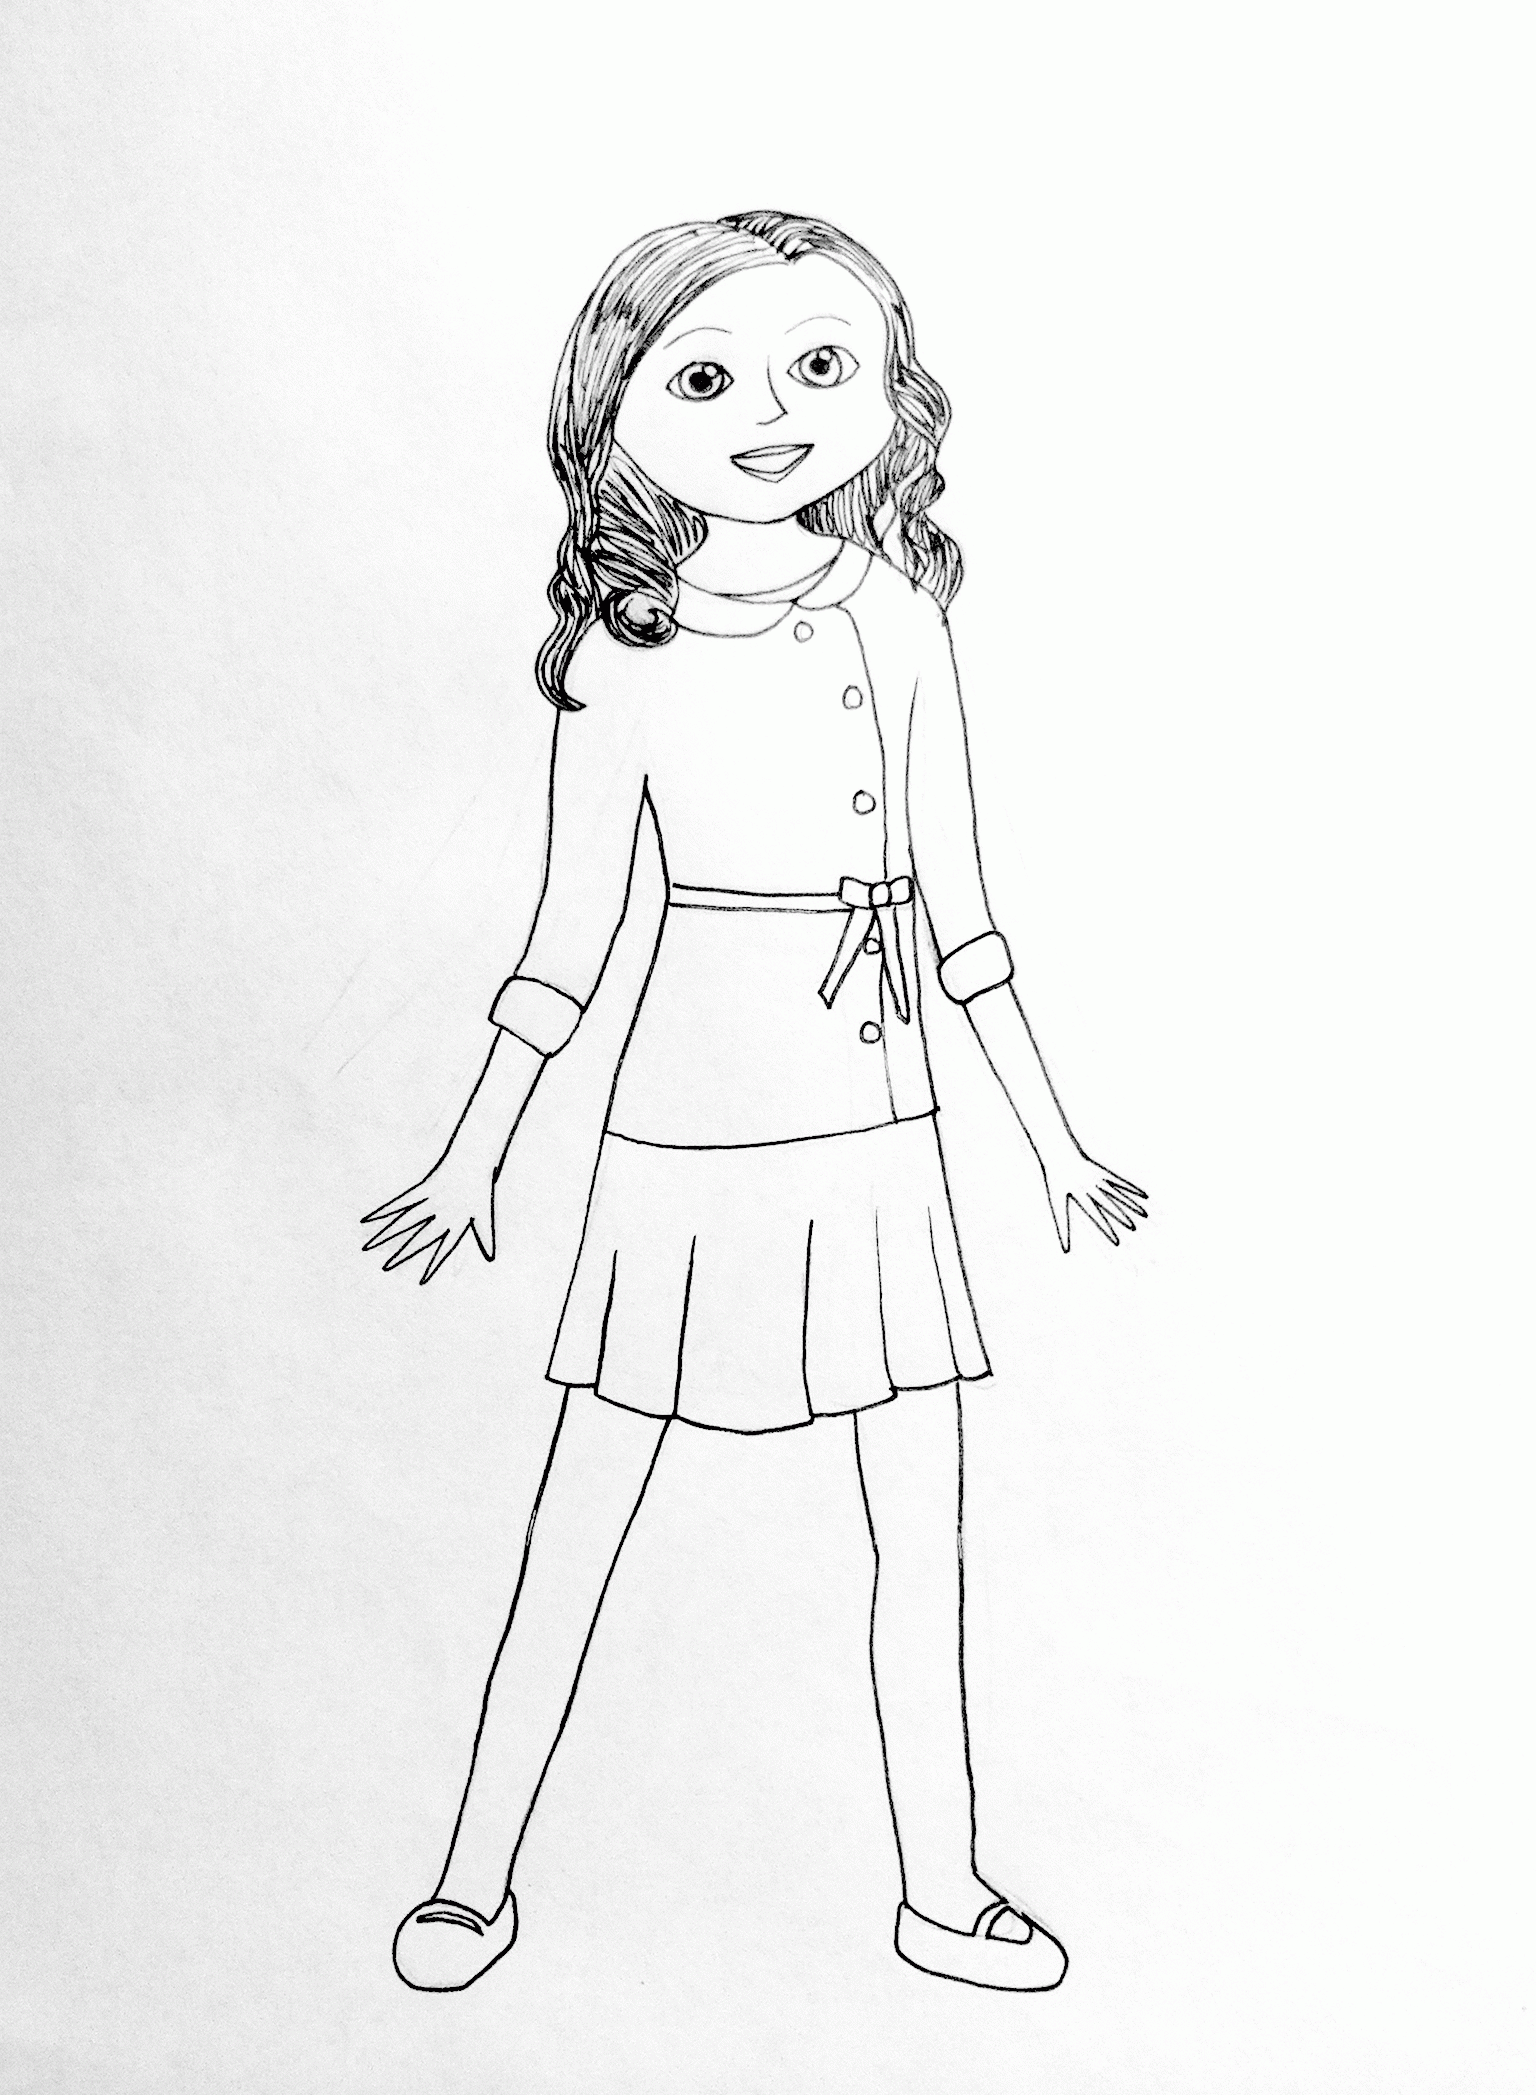 American Doll Saige Coloring Pages | Coloring Pages For All Ages